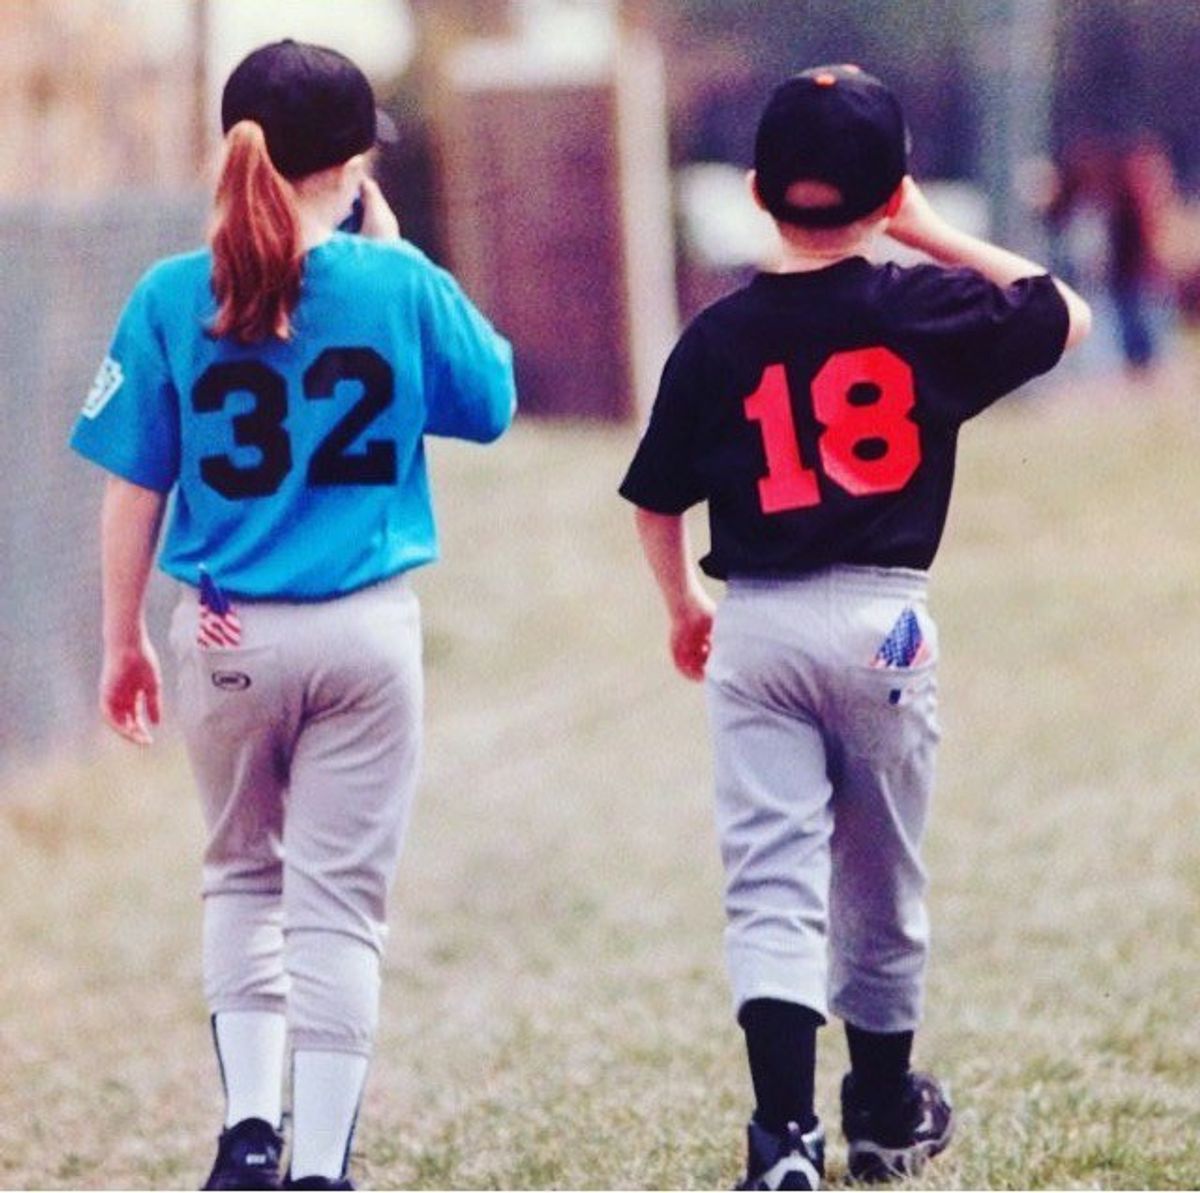 An Open Letter to the Younger Athletes